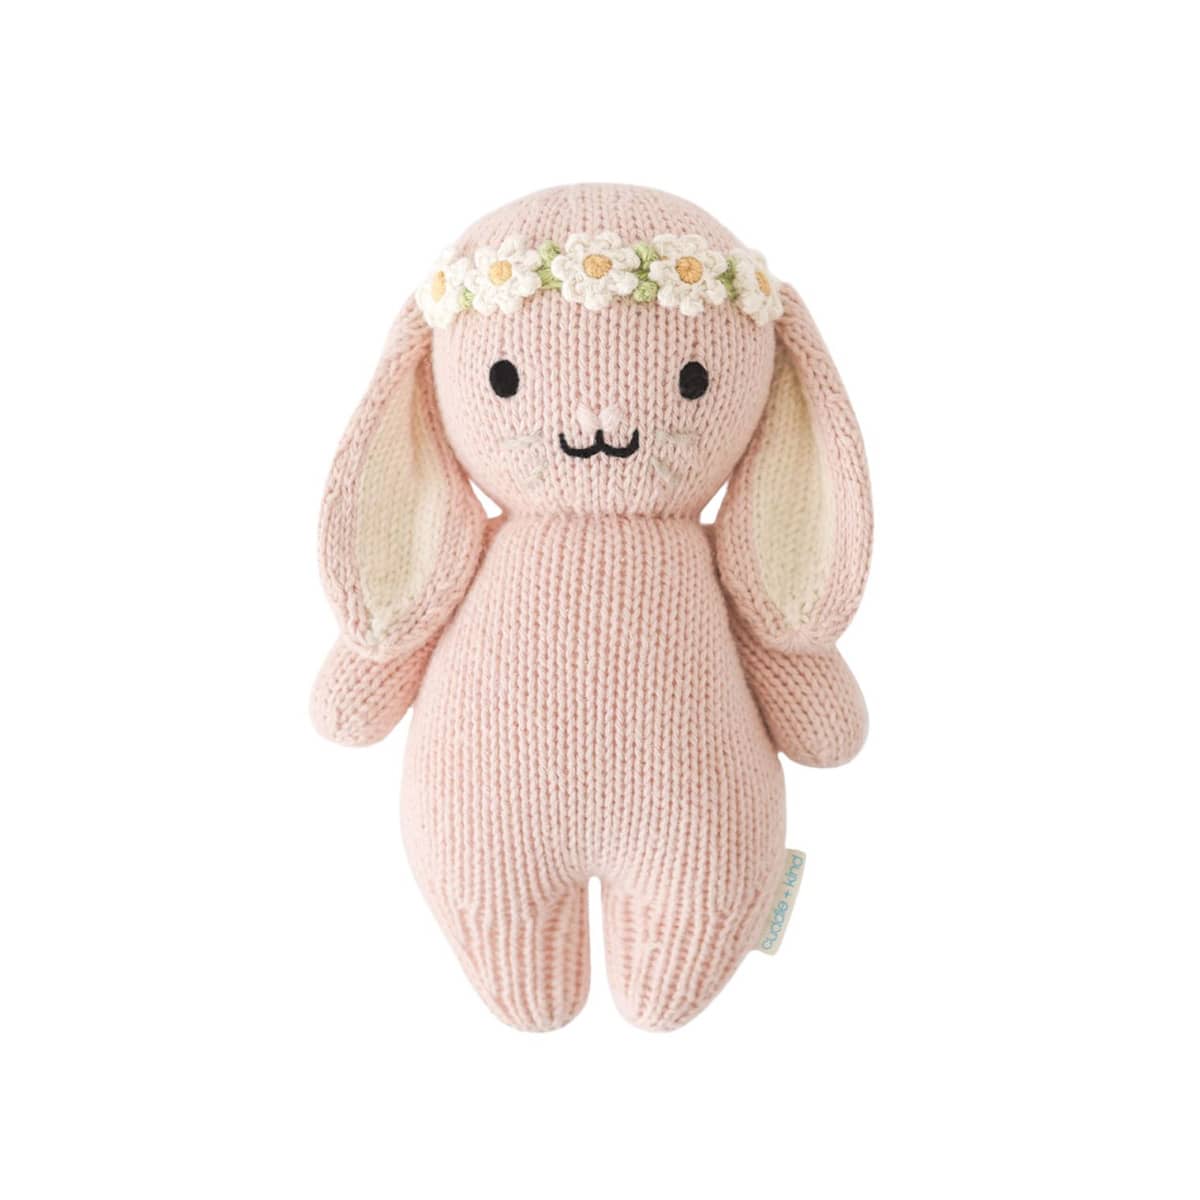 Cuddle + Kind Hand-Knit Doll - Baby Bunny (rose with ivory floral)